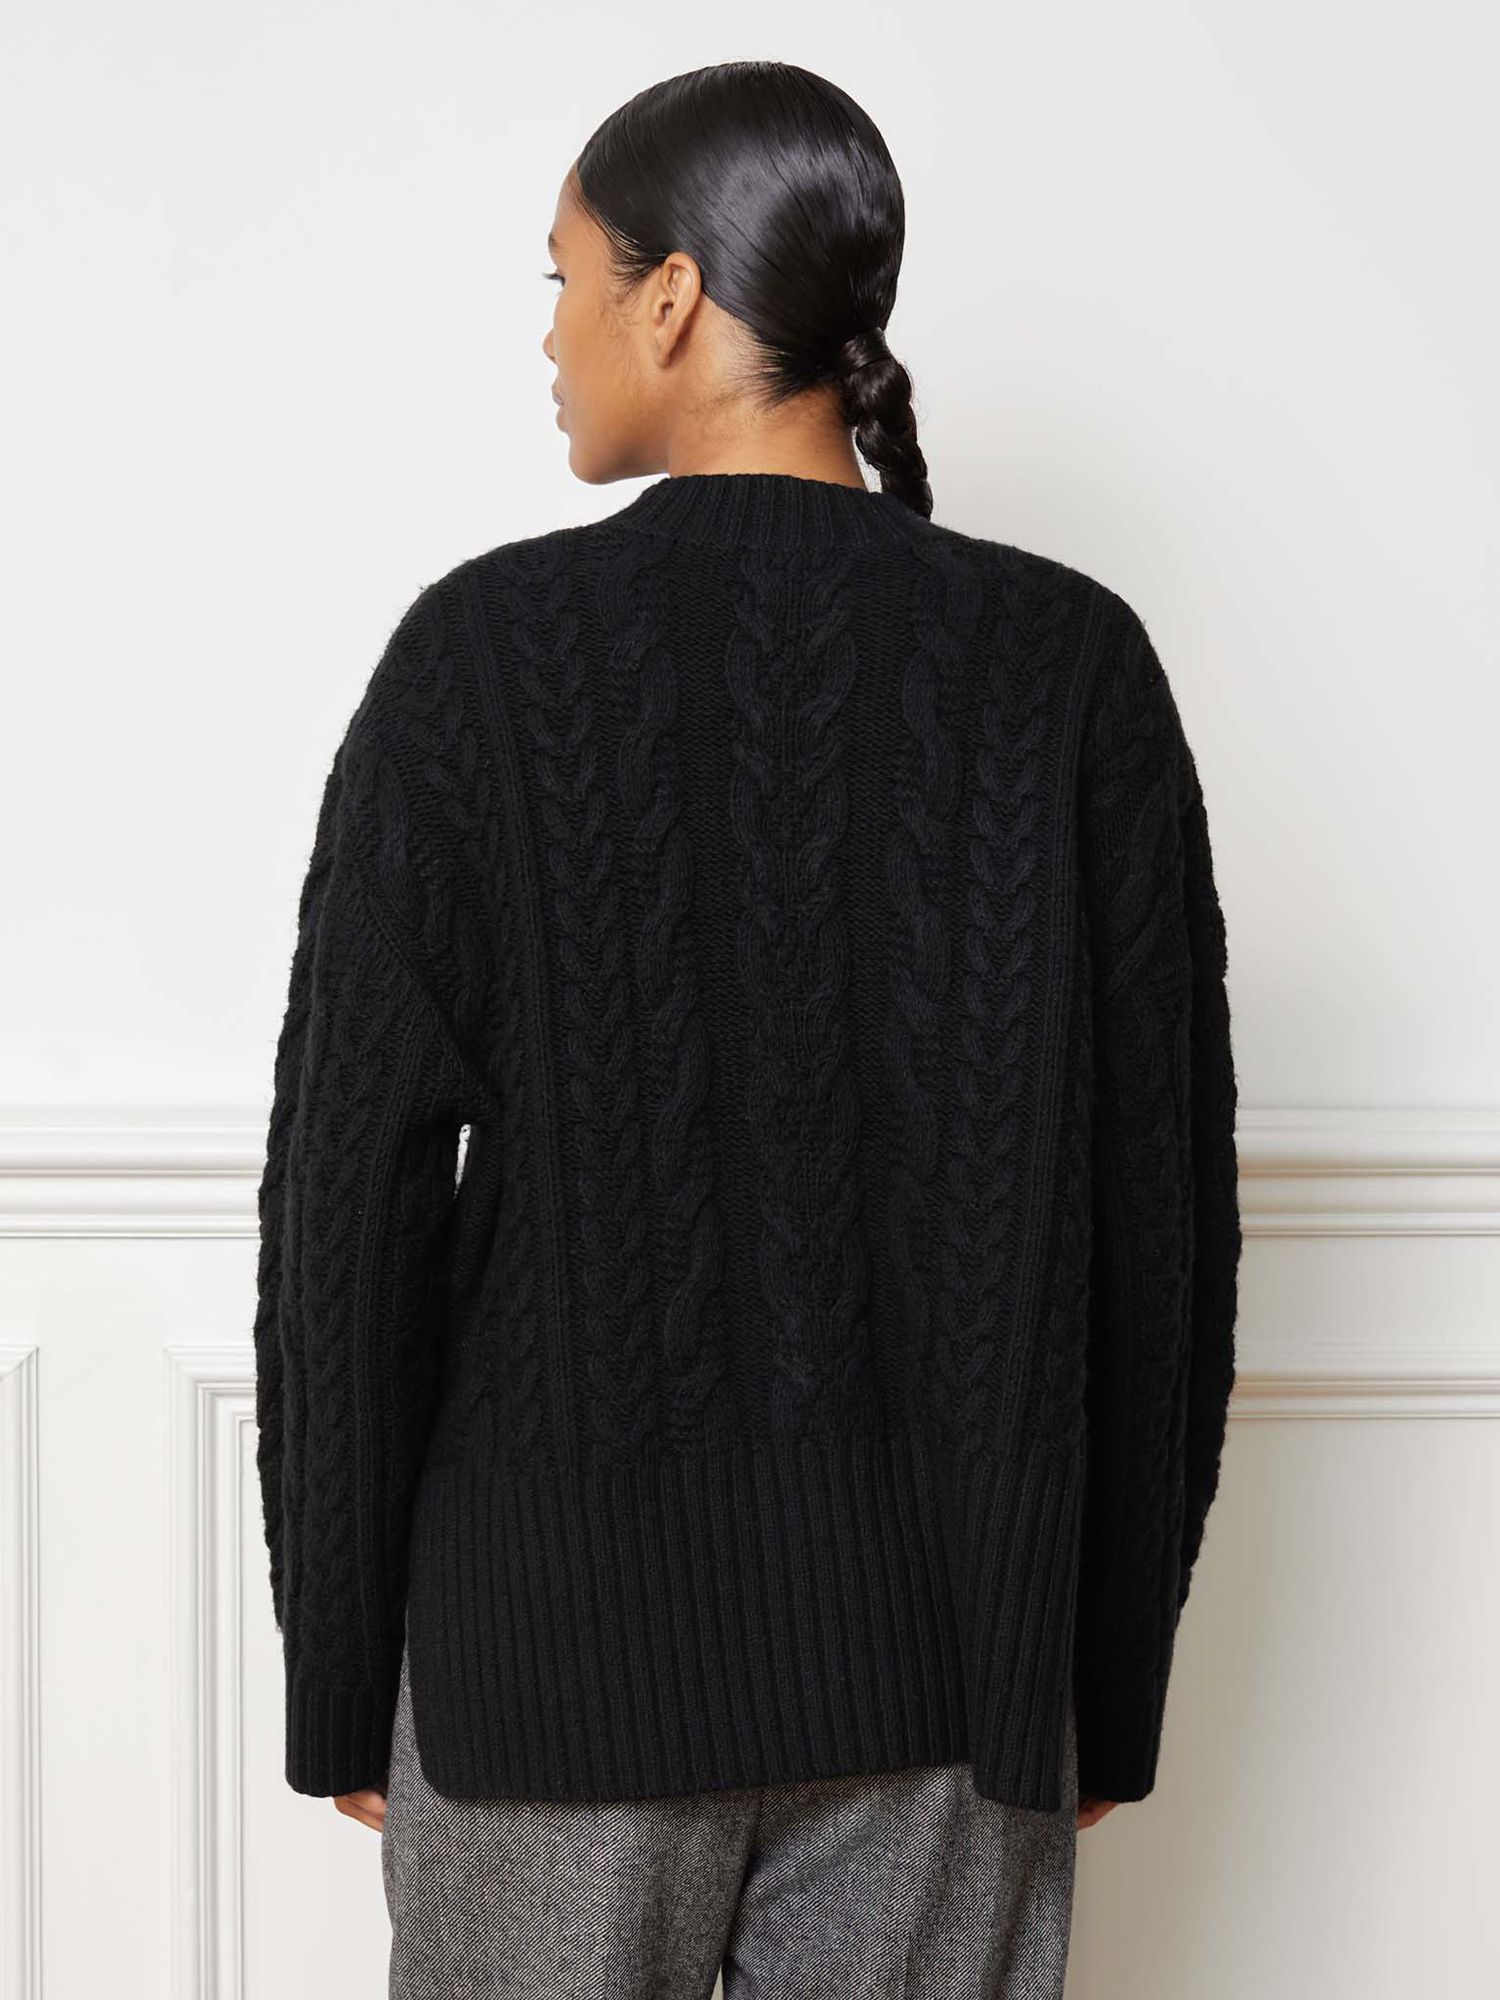 Albaray Cable Wool Blend Jumper, Black at John Lewis & Partners